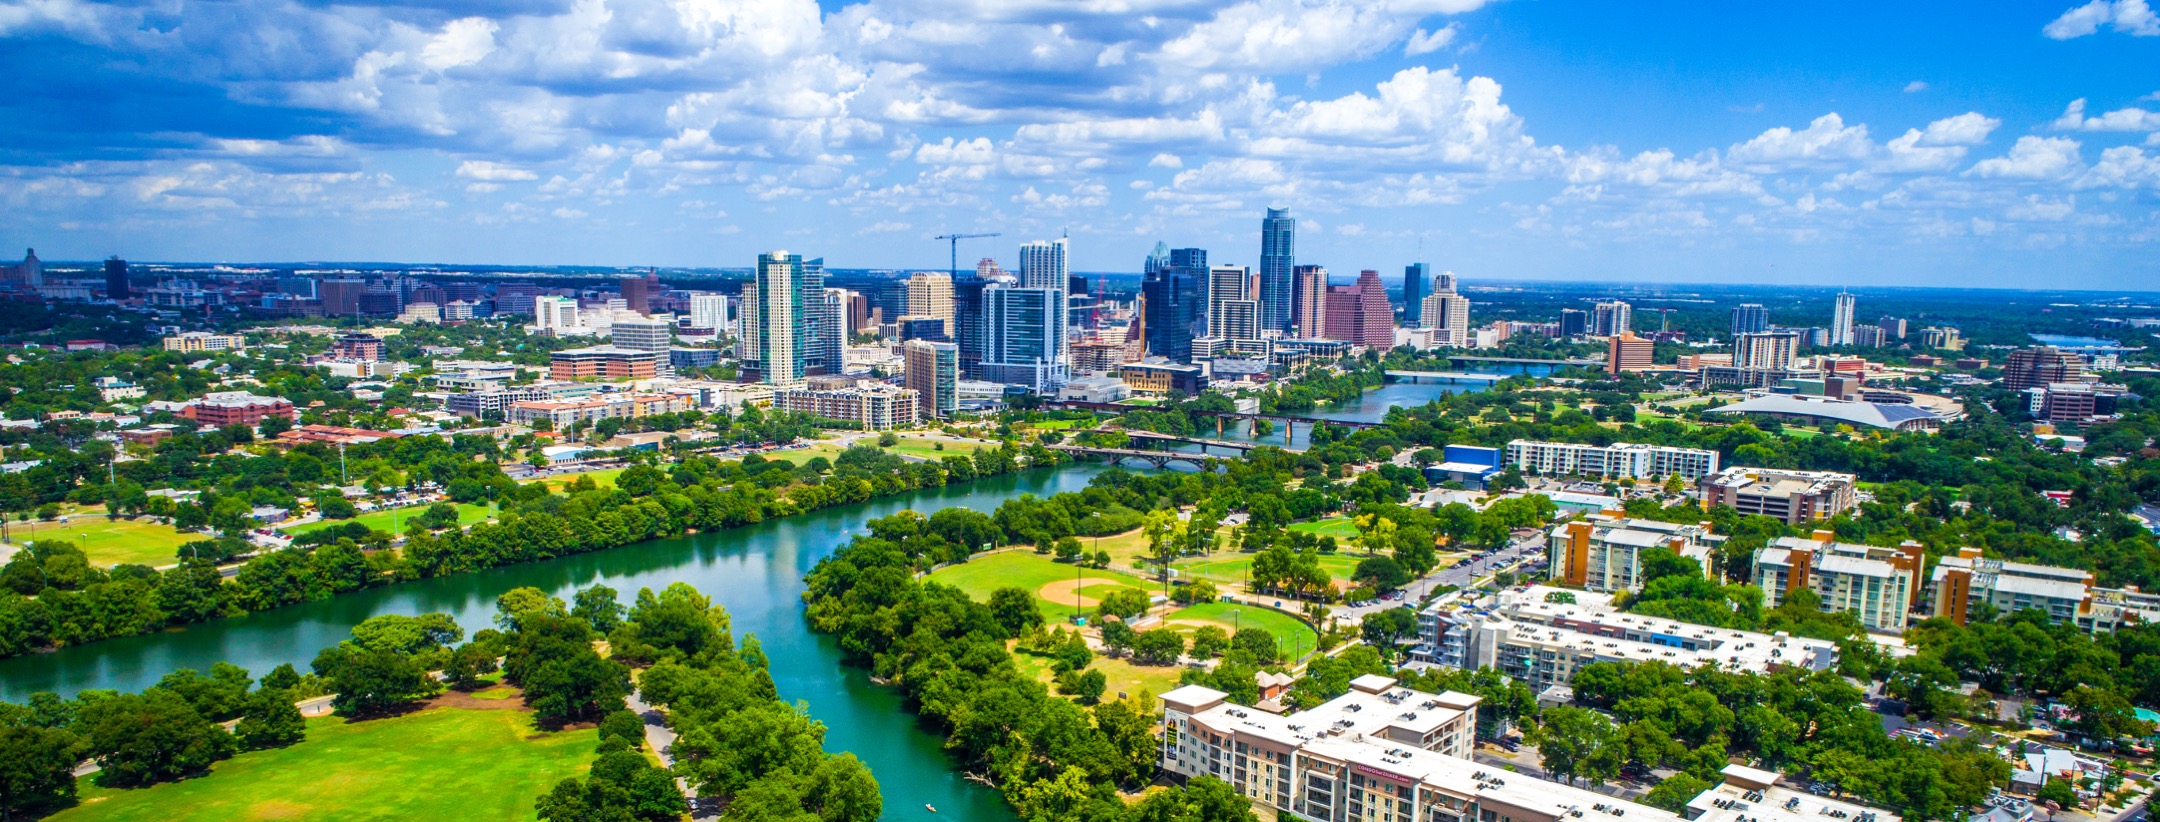 city-of-austin-releases-economic-recovery-and-resiliency-framework-for